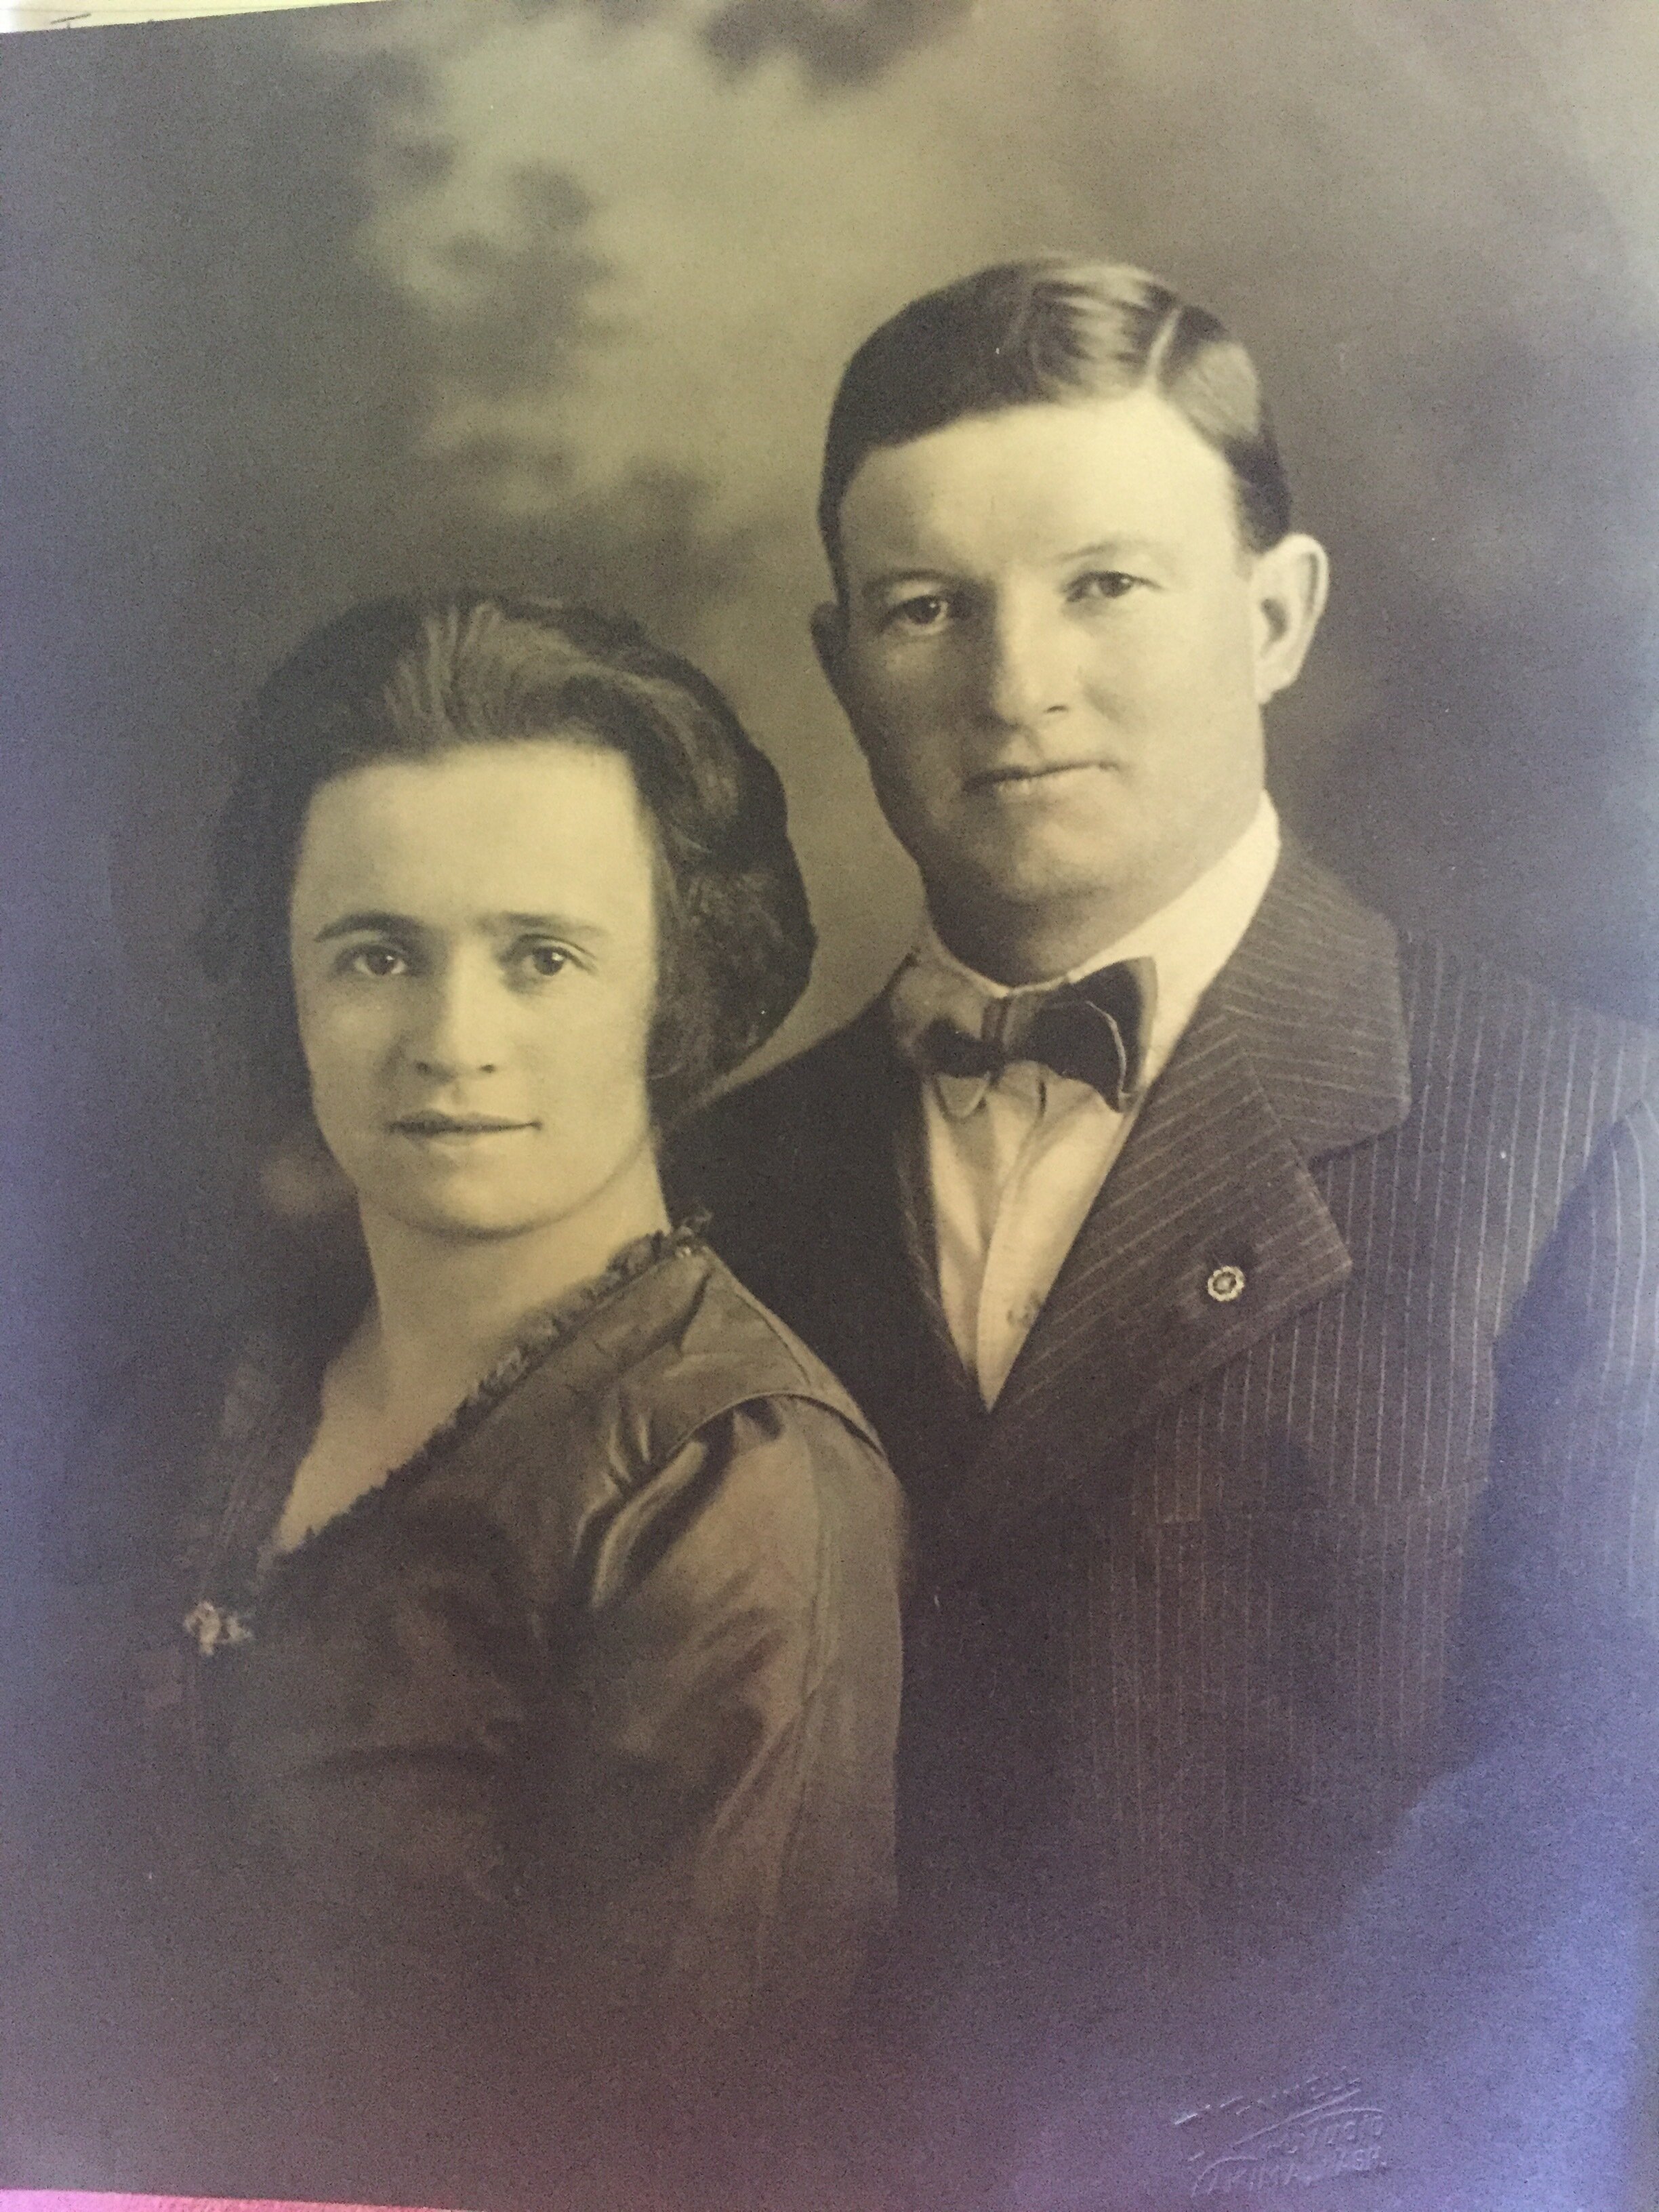 My great grandparents James and Minnie Reese